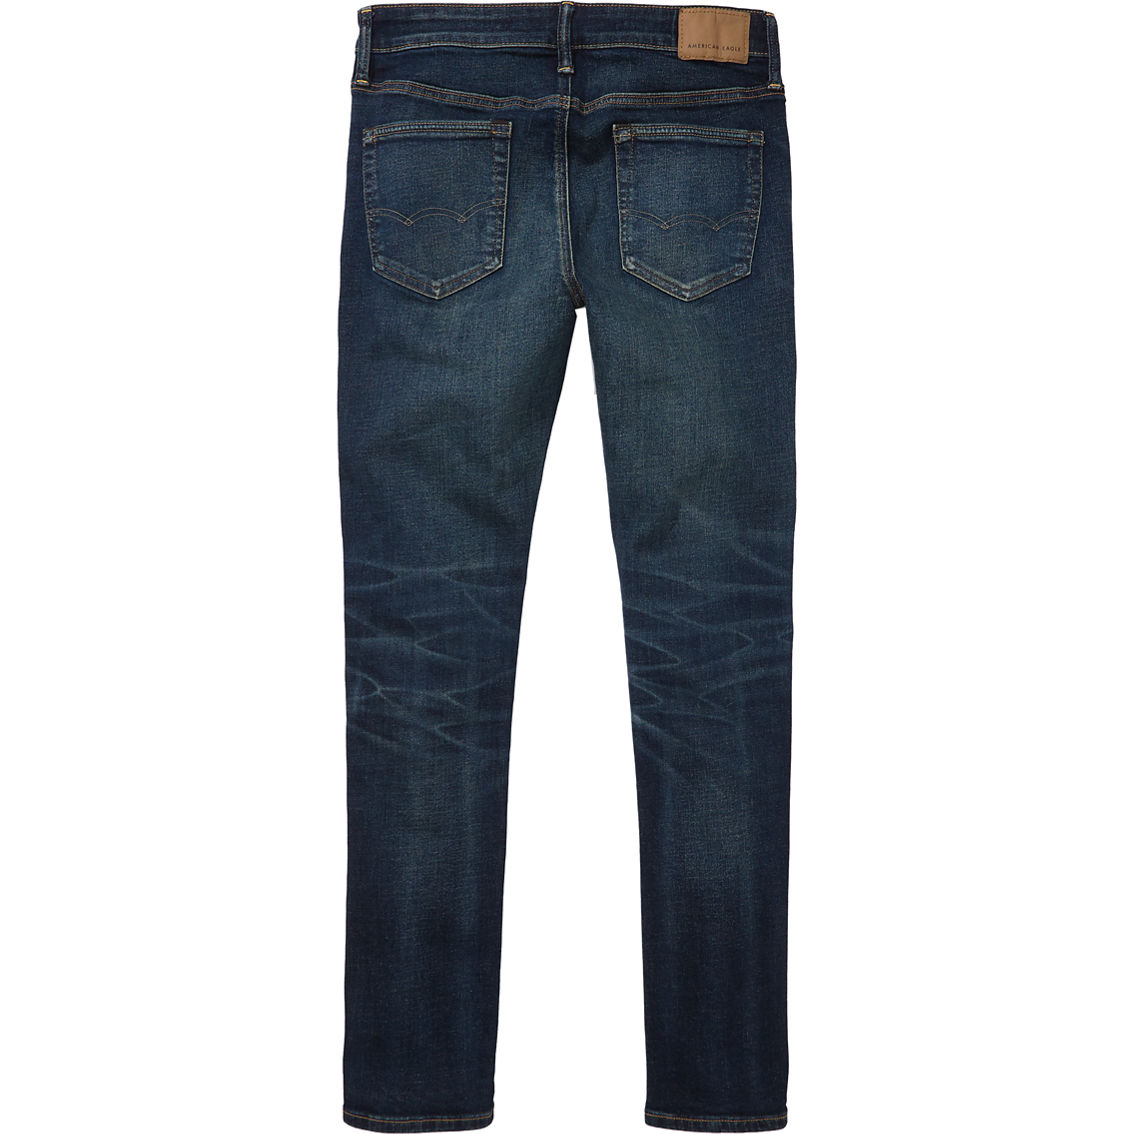 American Eagle Slim Fit Jeans | Jeans | Clothing & Accessories | Shop ...